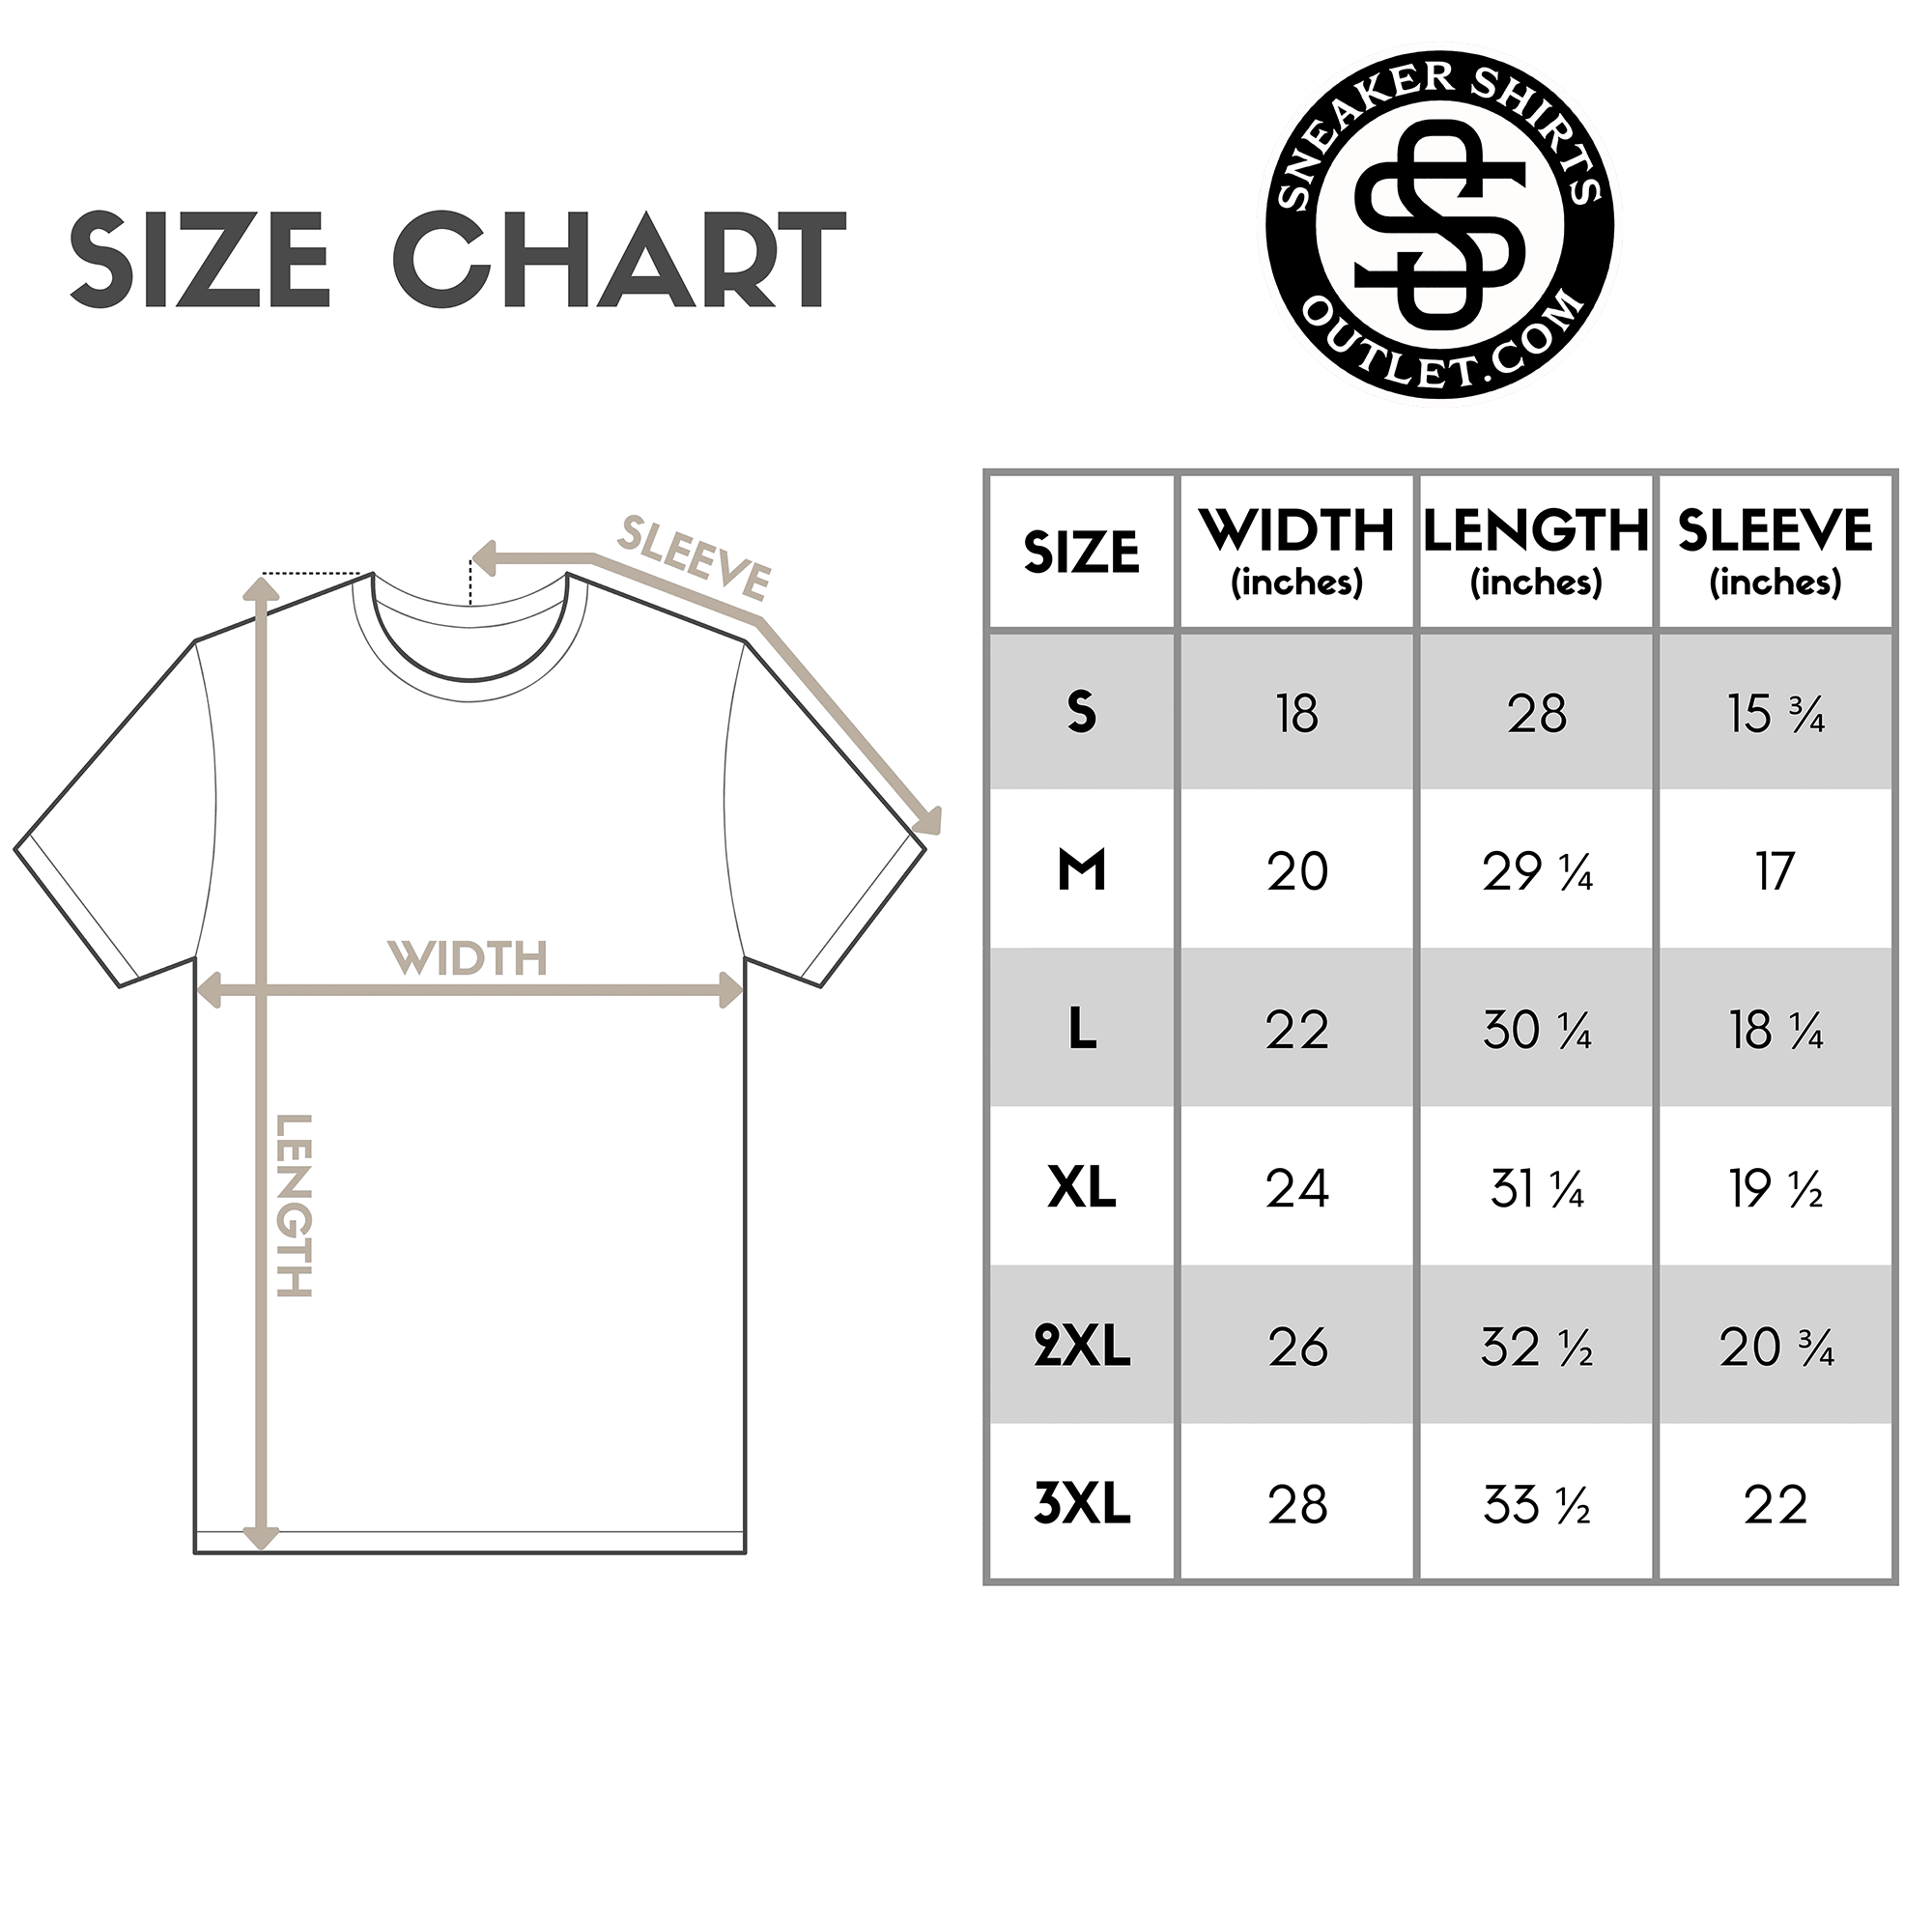 One of a Kind size chart photo